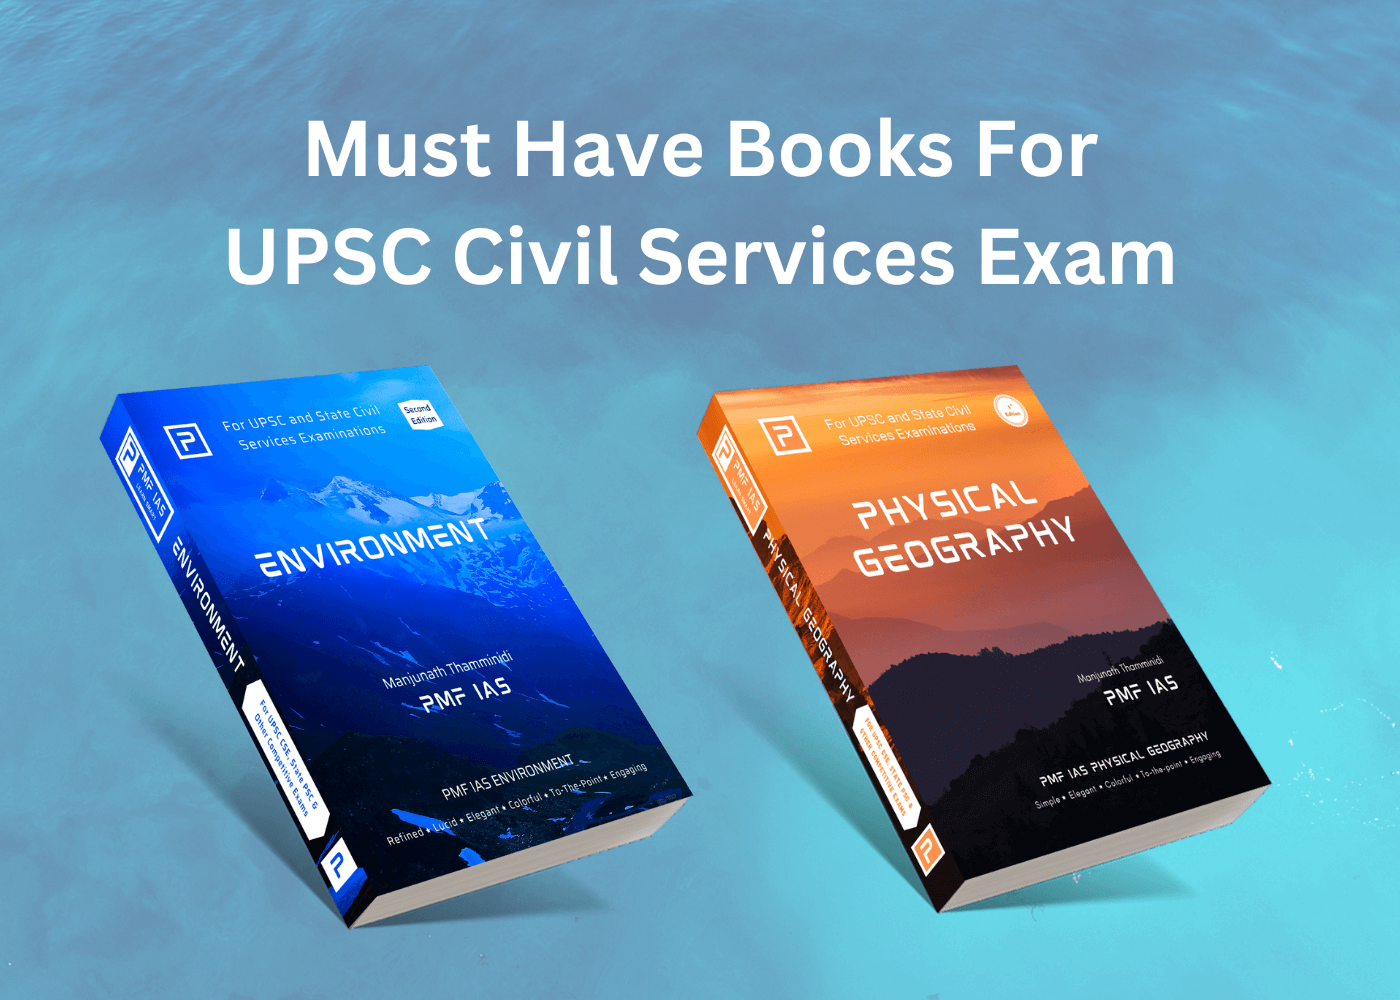 Must Have Books for UPSC IAS Civil Services Exam